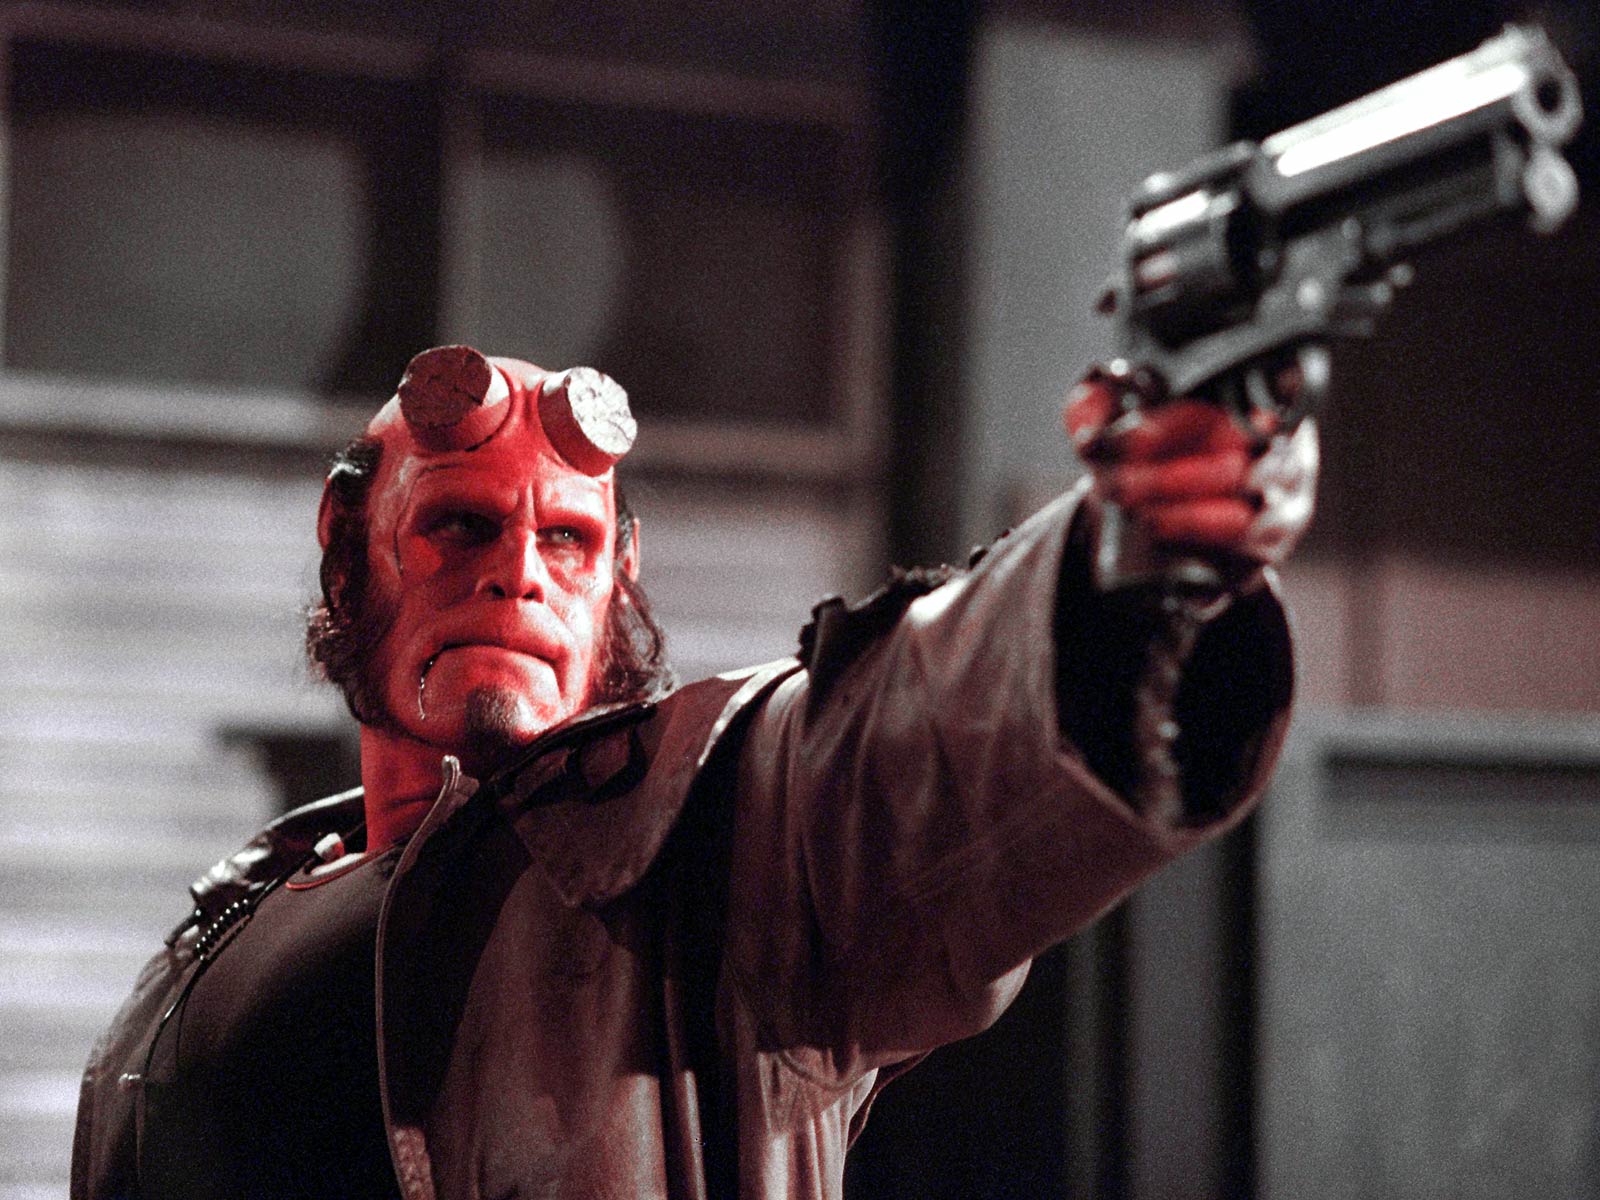 Ron Perlman's 'HELLBOY' Returns to Fulfill a Child's Wish